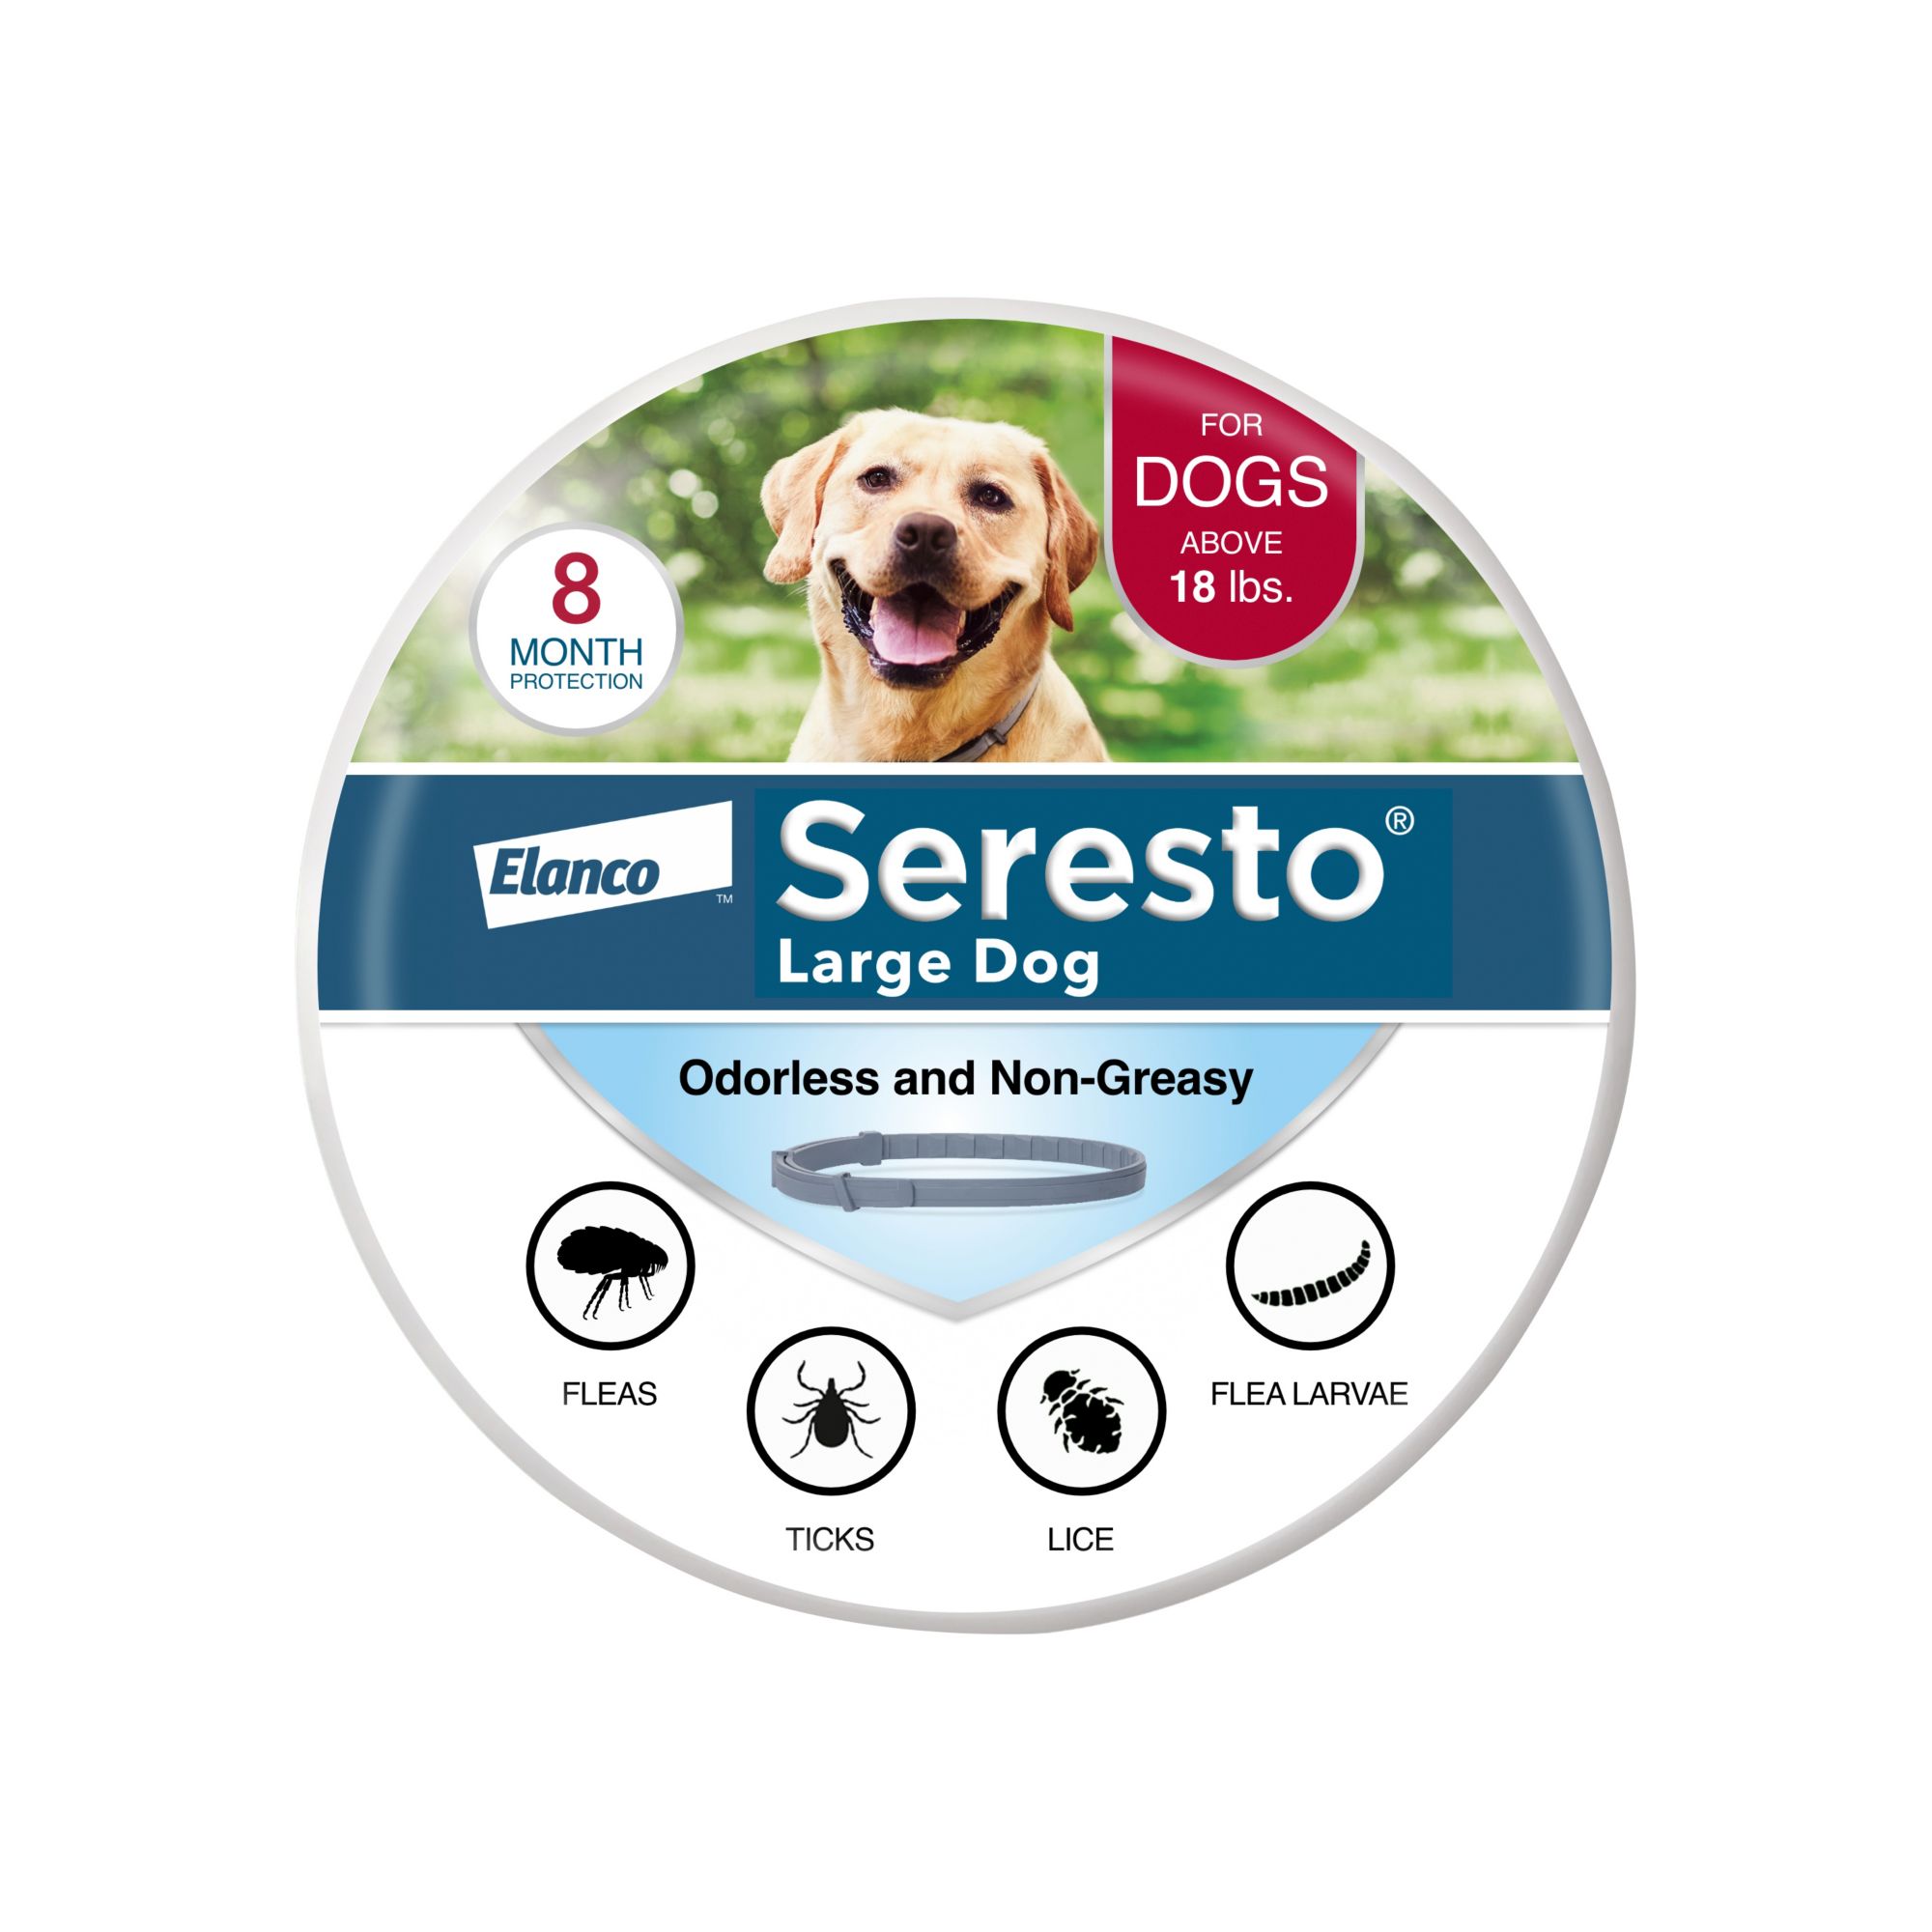 are there any seresto for both cats and dogs